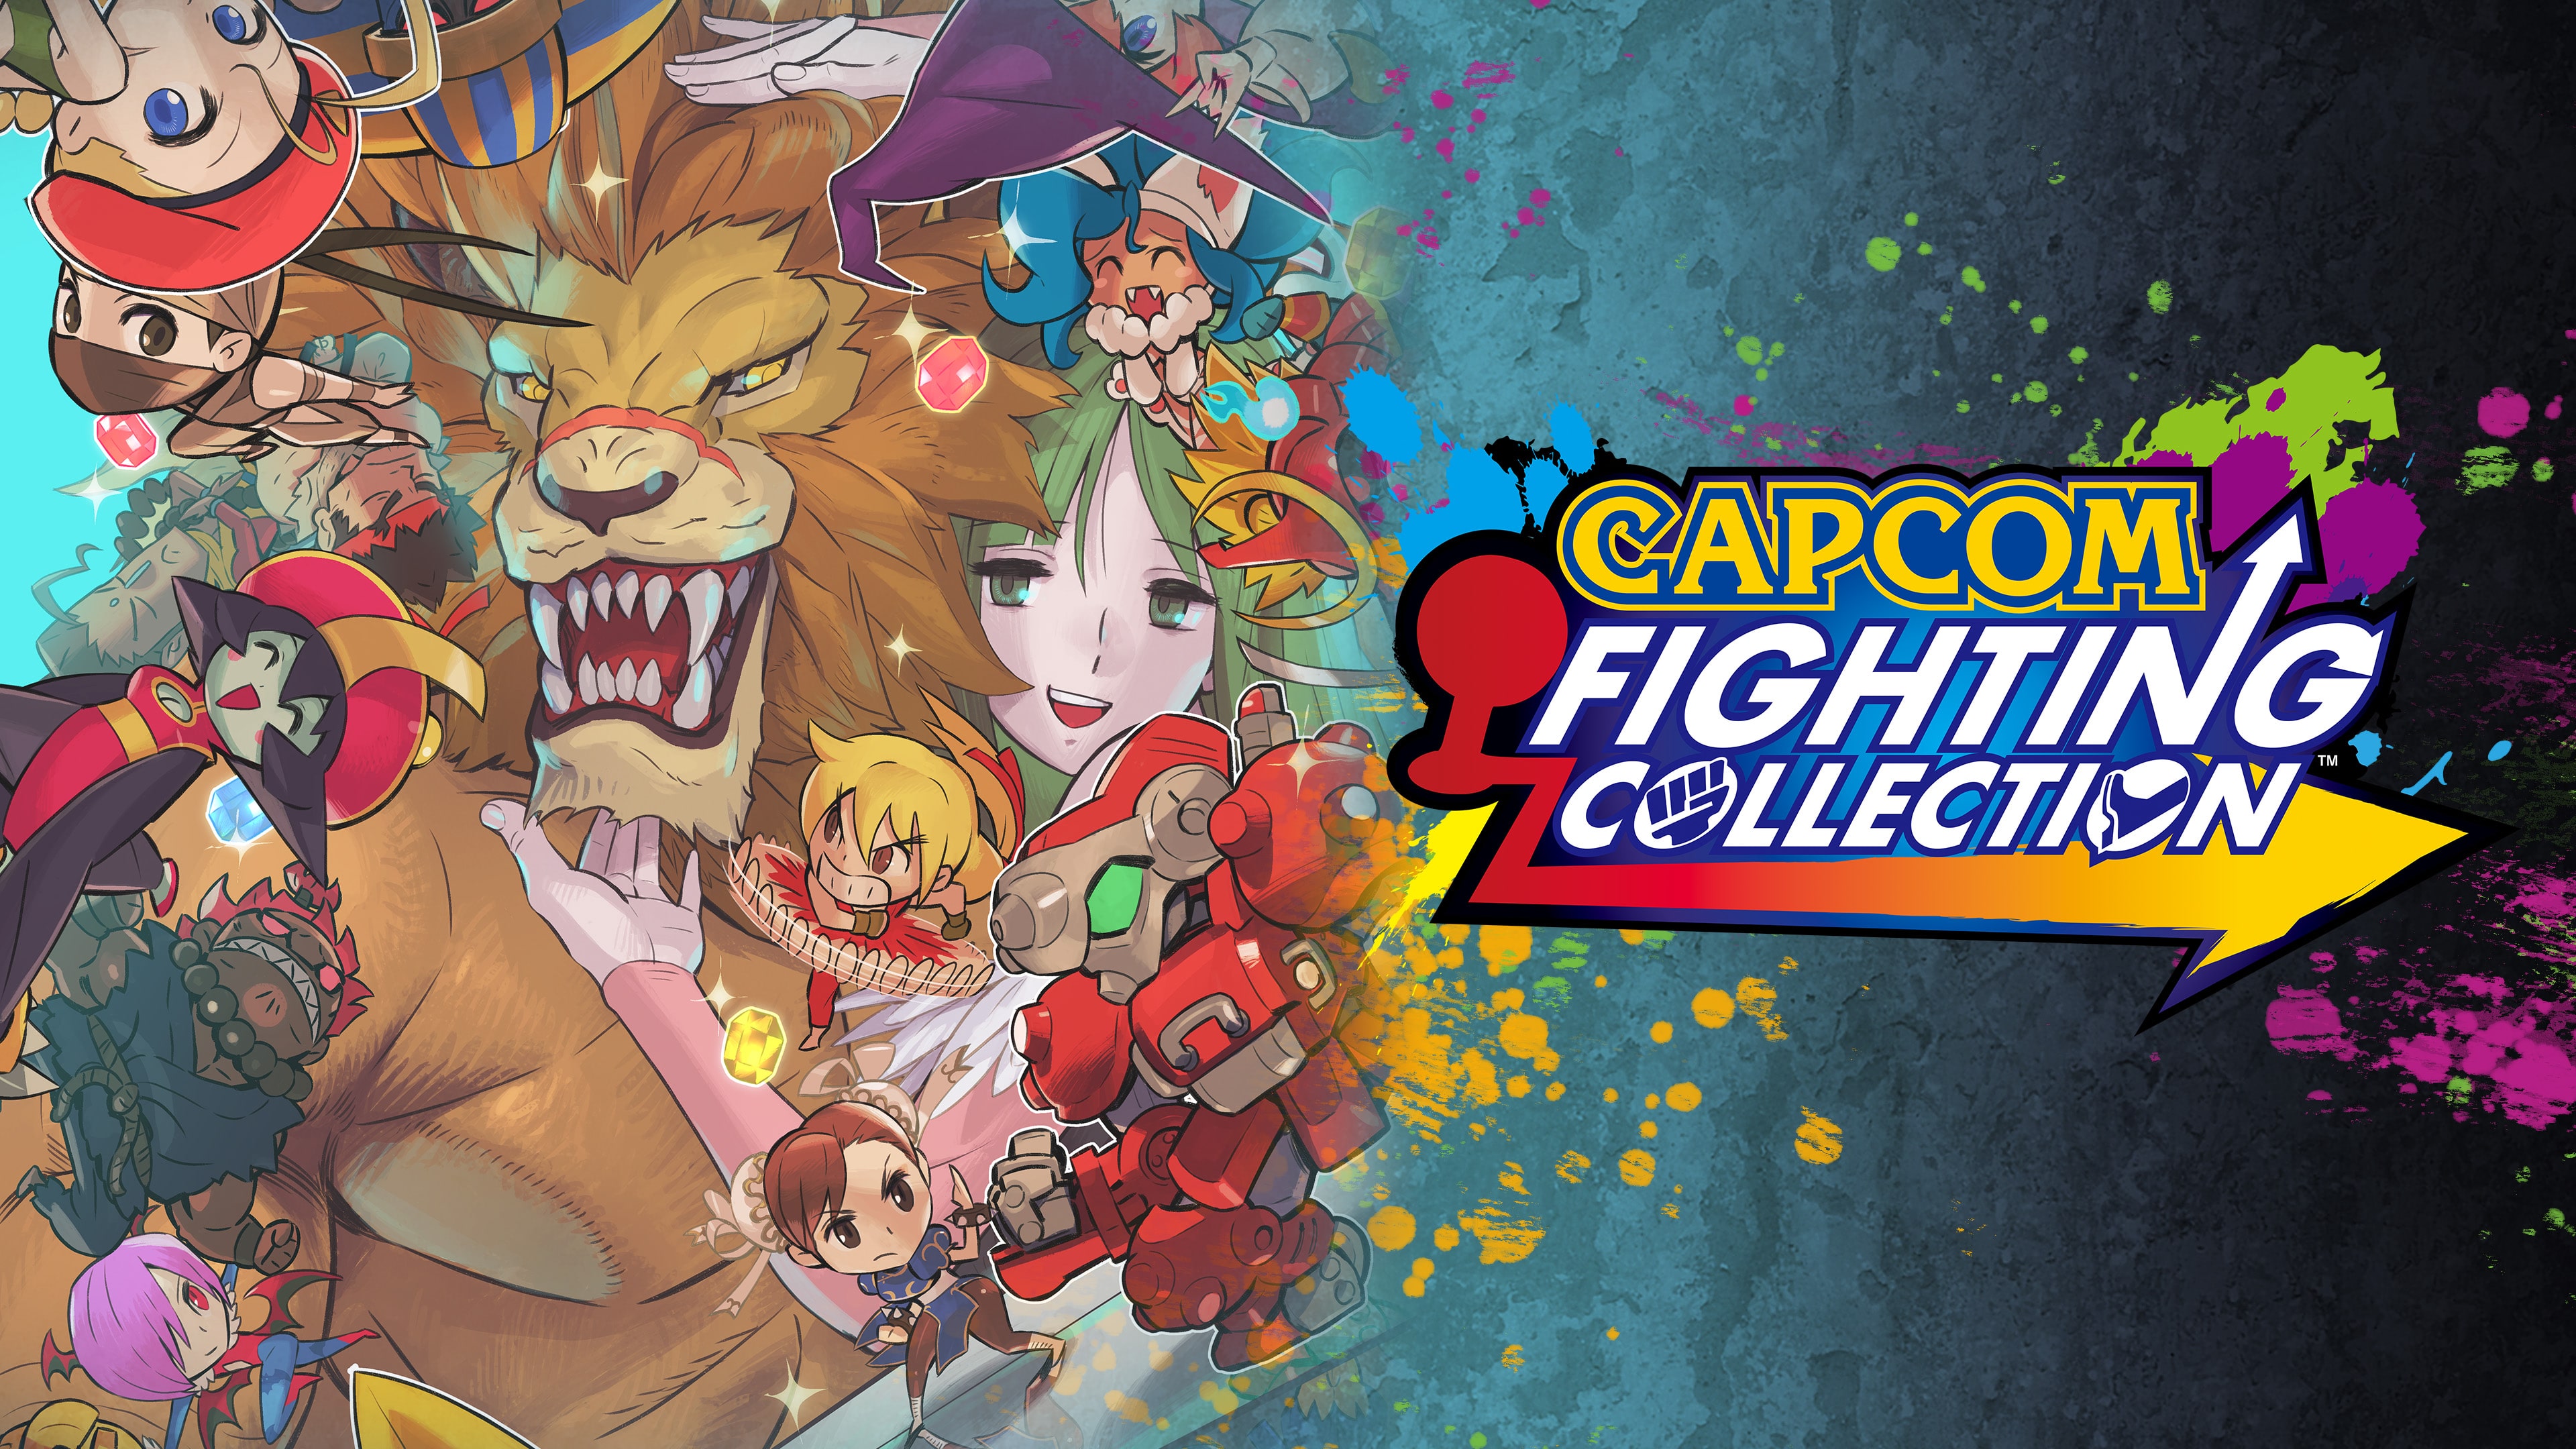 Capcom Fighting Collection (Simplified Chinese, English, Korean, Japanese, Traditional Chinese)